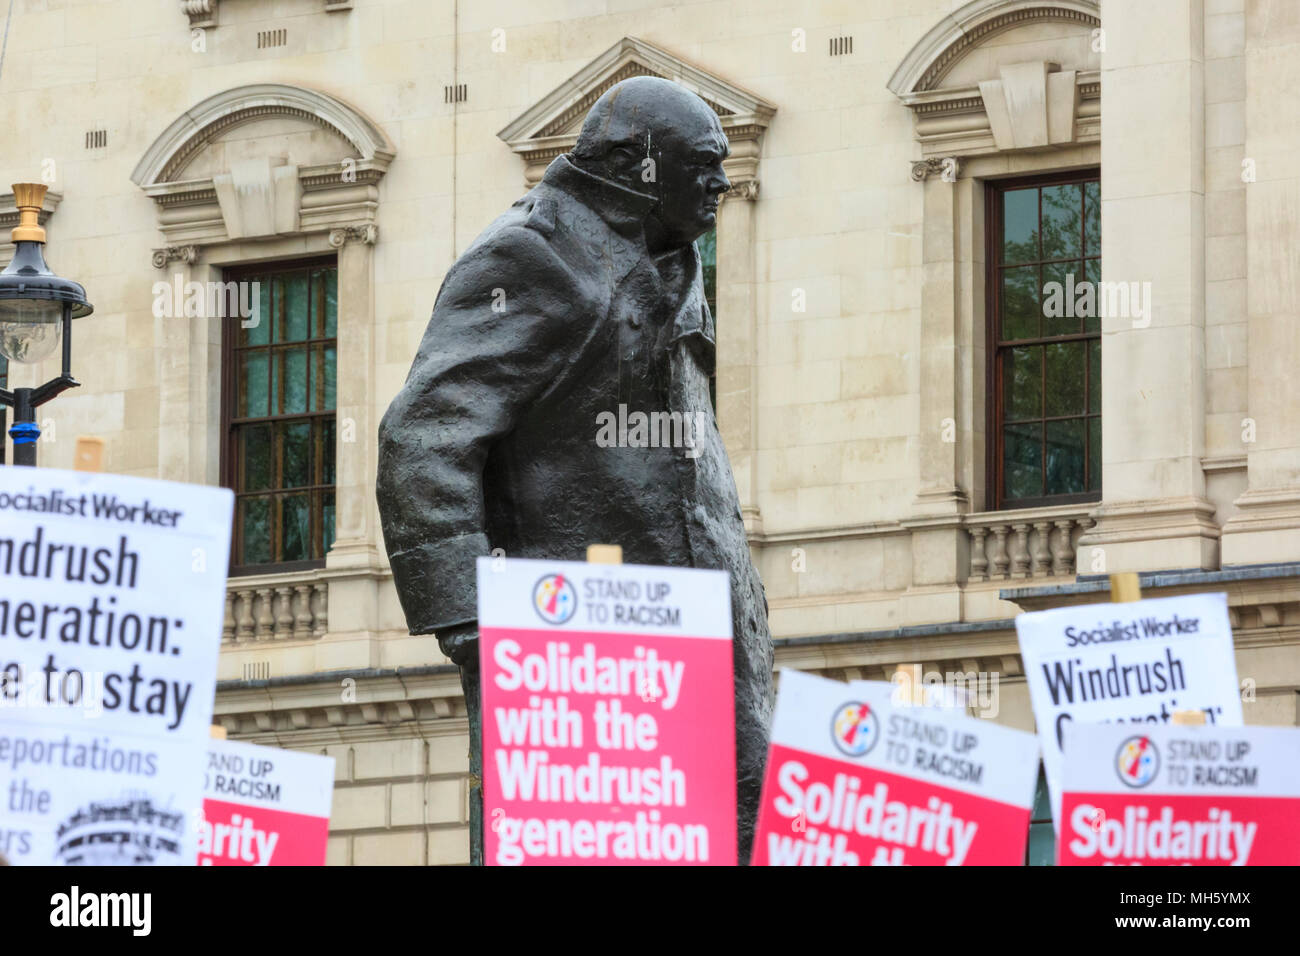 Westminster, London, 30th April 2018. People protest in solidarity, standing in front of the Churchill Statue in Parliament Square. A 'Solidarity with the Windrush generatiion' protest is organised by Stand Up to Racism to signal unity and common anti-racism aims. Credit: Imageplotter News and Sports/Alamy Live News Stock Photo